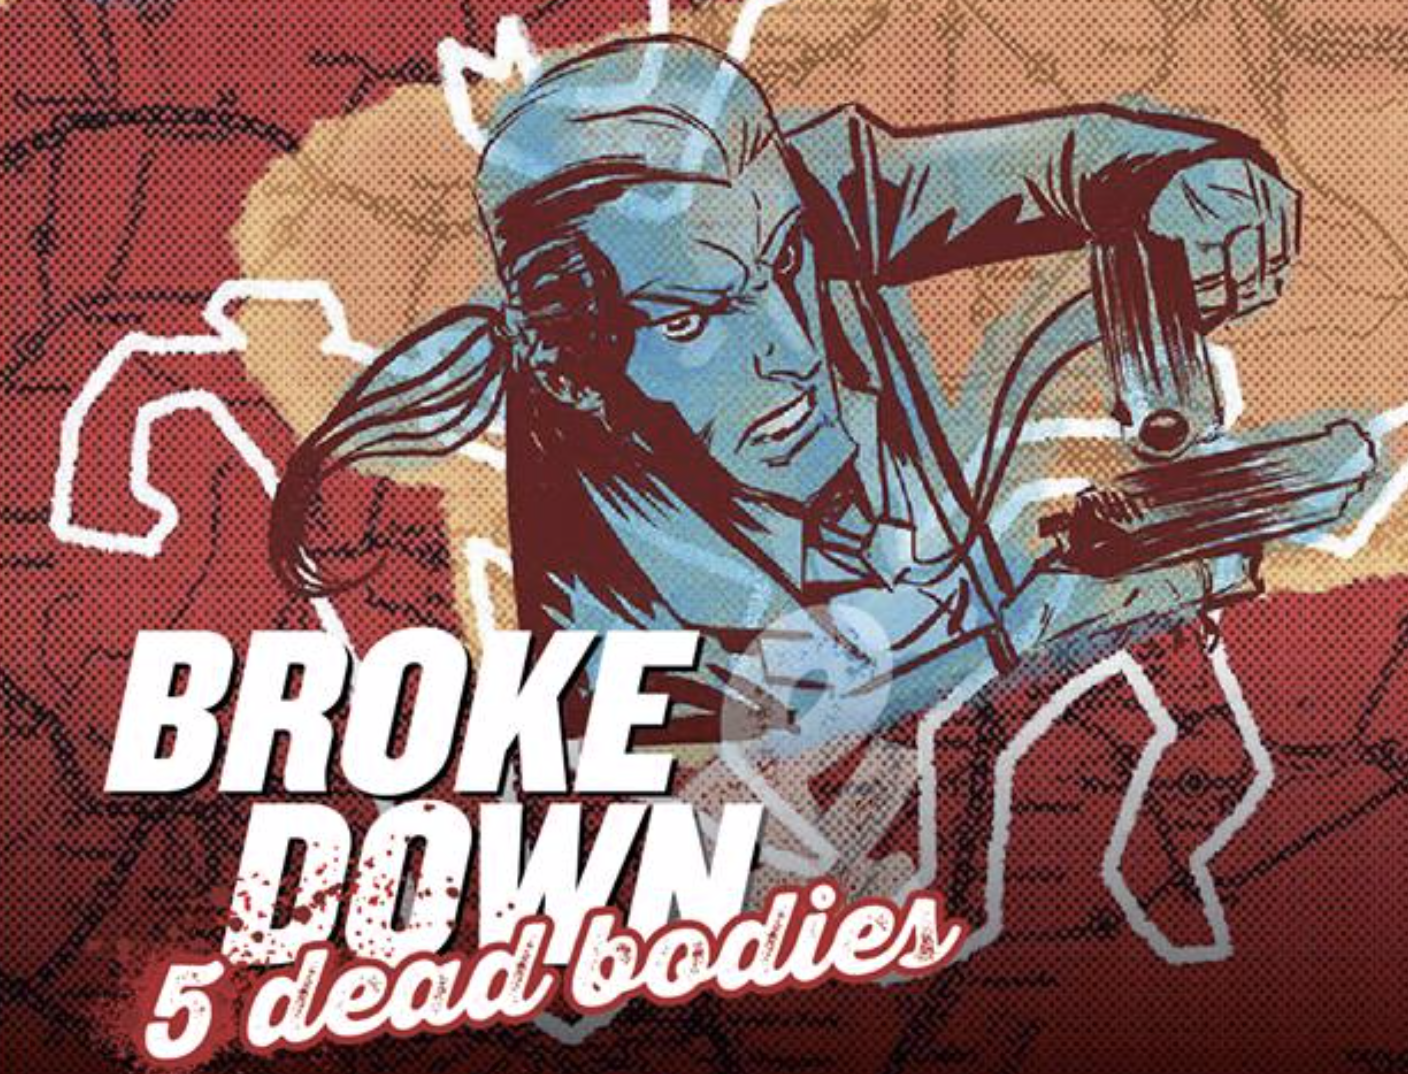 NOW CROWDFUNDING:: :: Broke Down and Four Dead Bodies – Issue 1 & 2 – CRIME NOIR